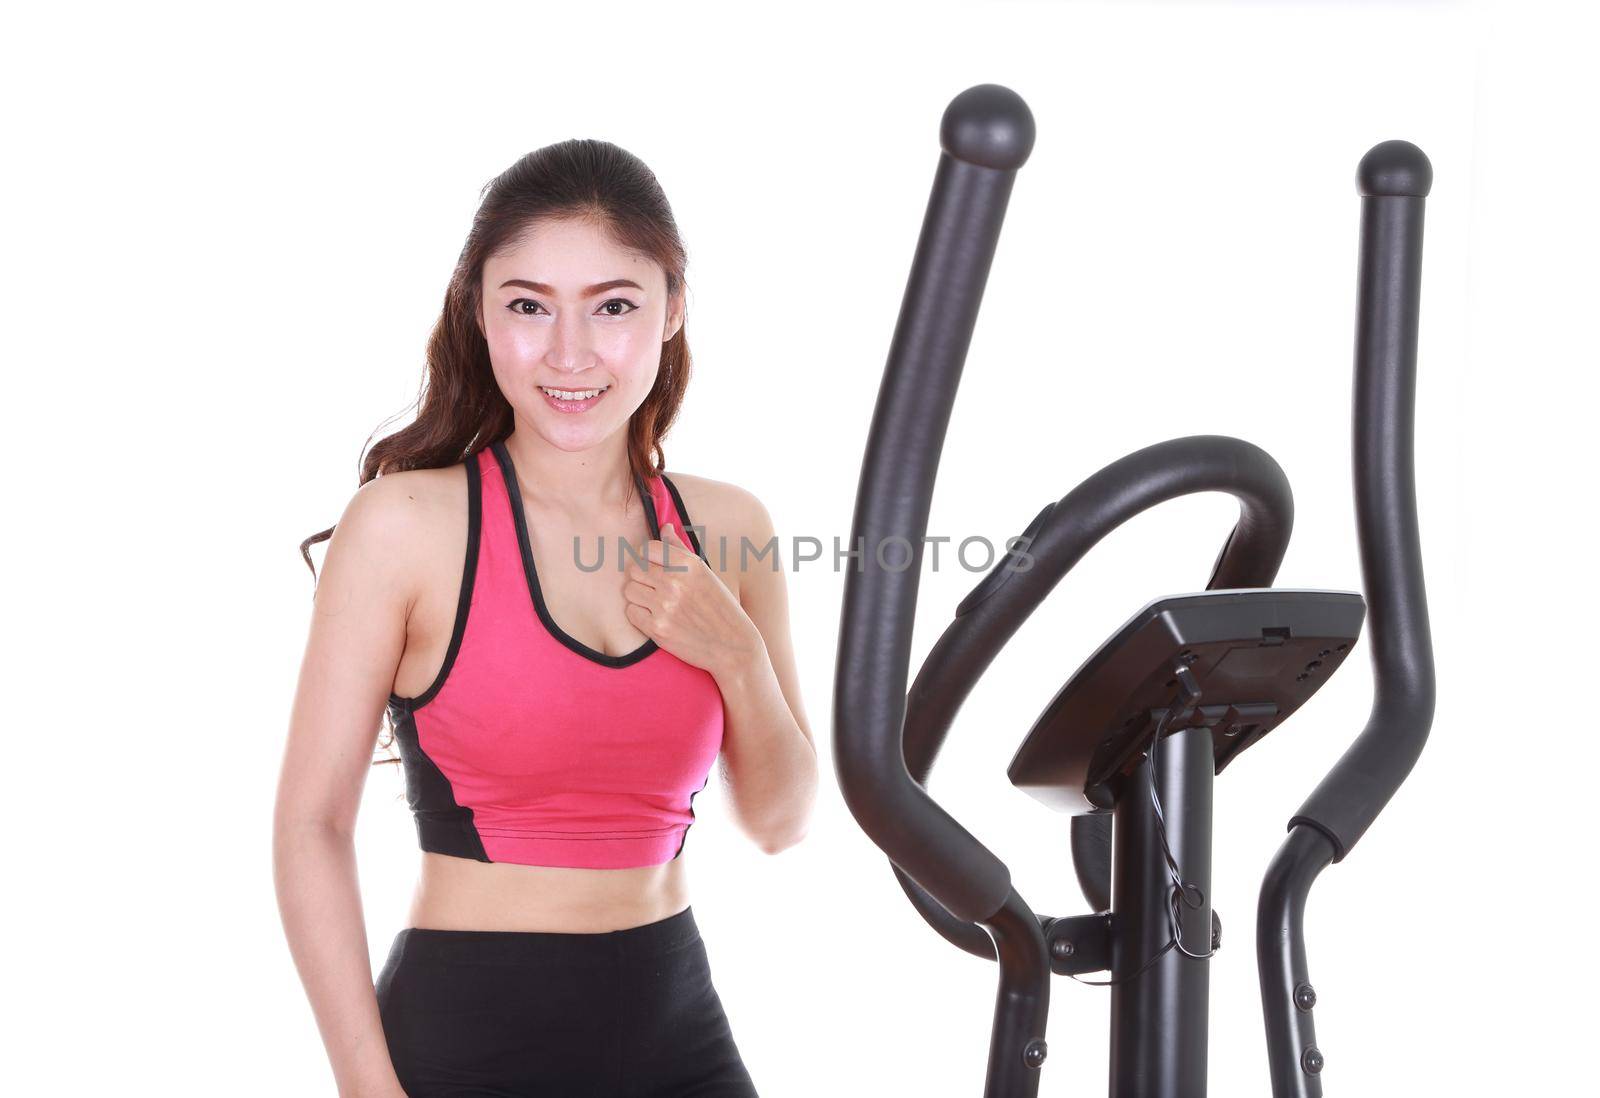 young woman doing exercises with exercise machine, on white background